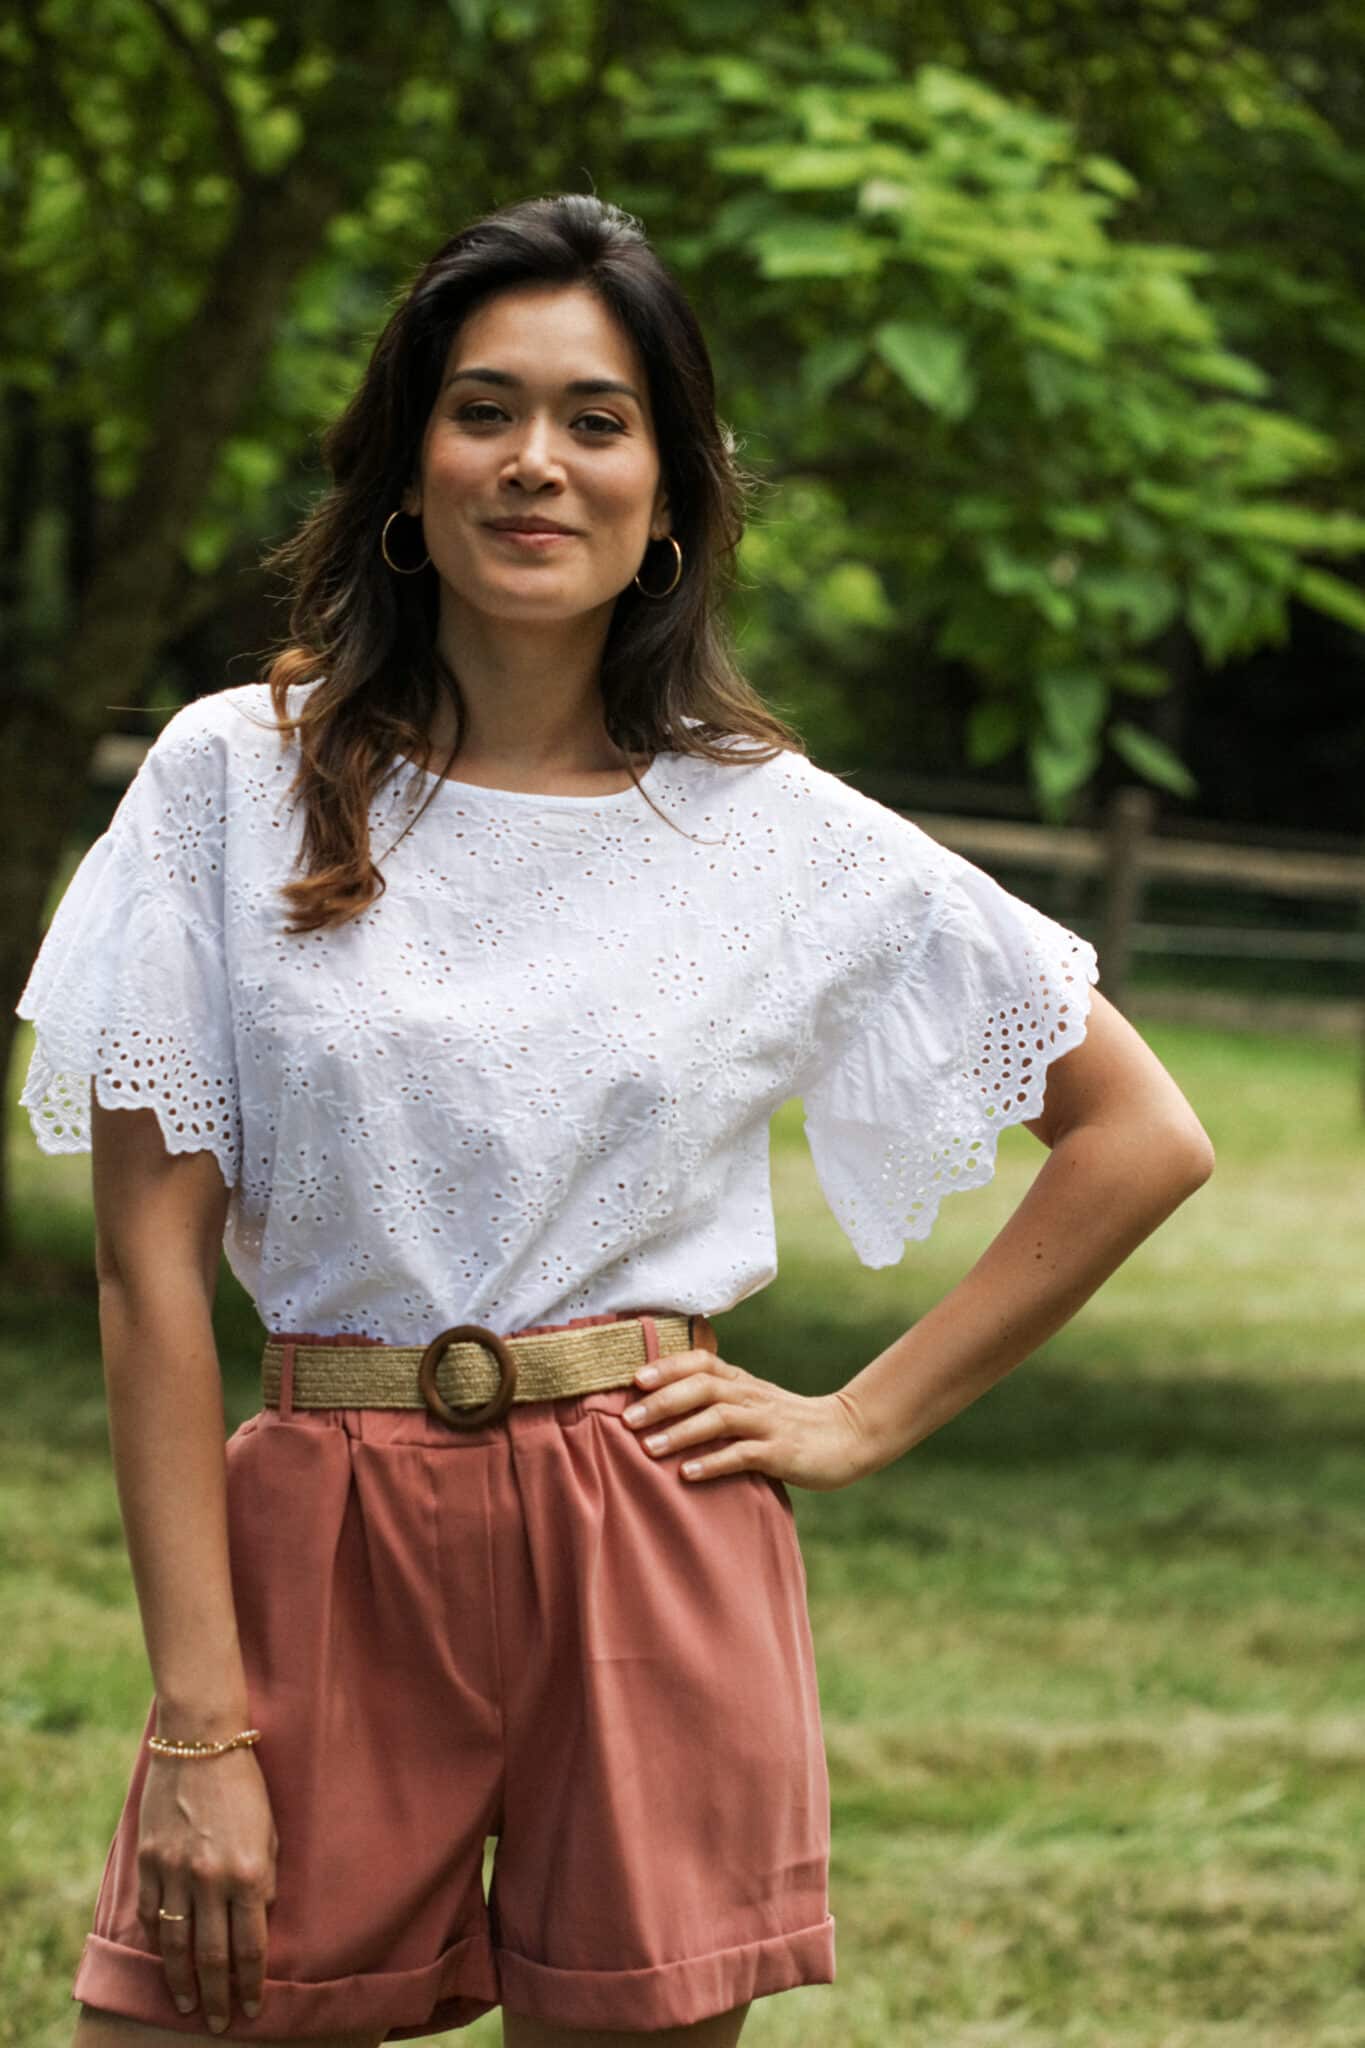 English embroidery blouse in a field